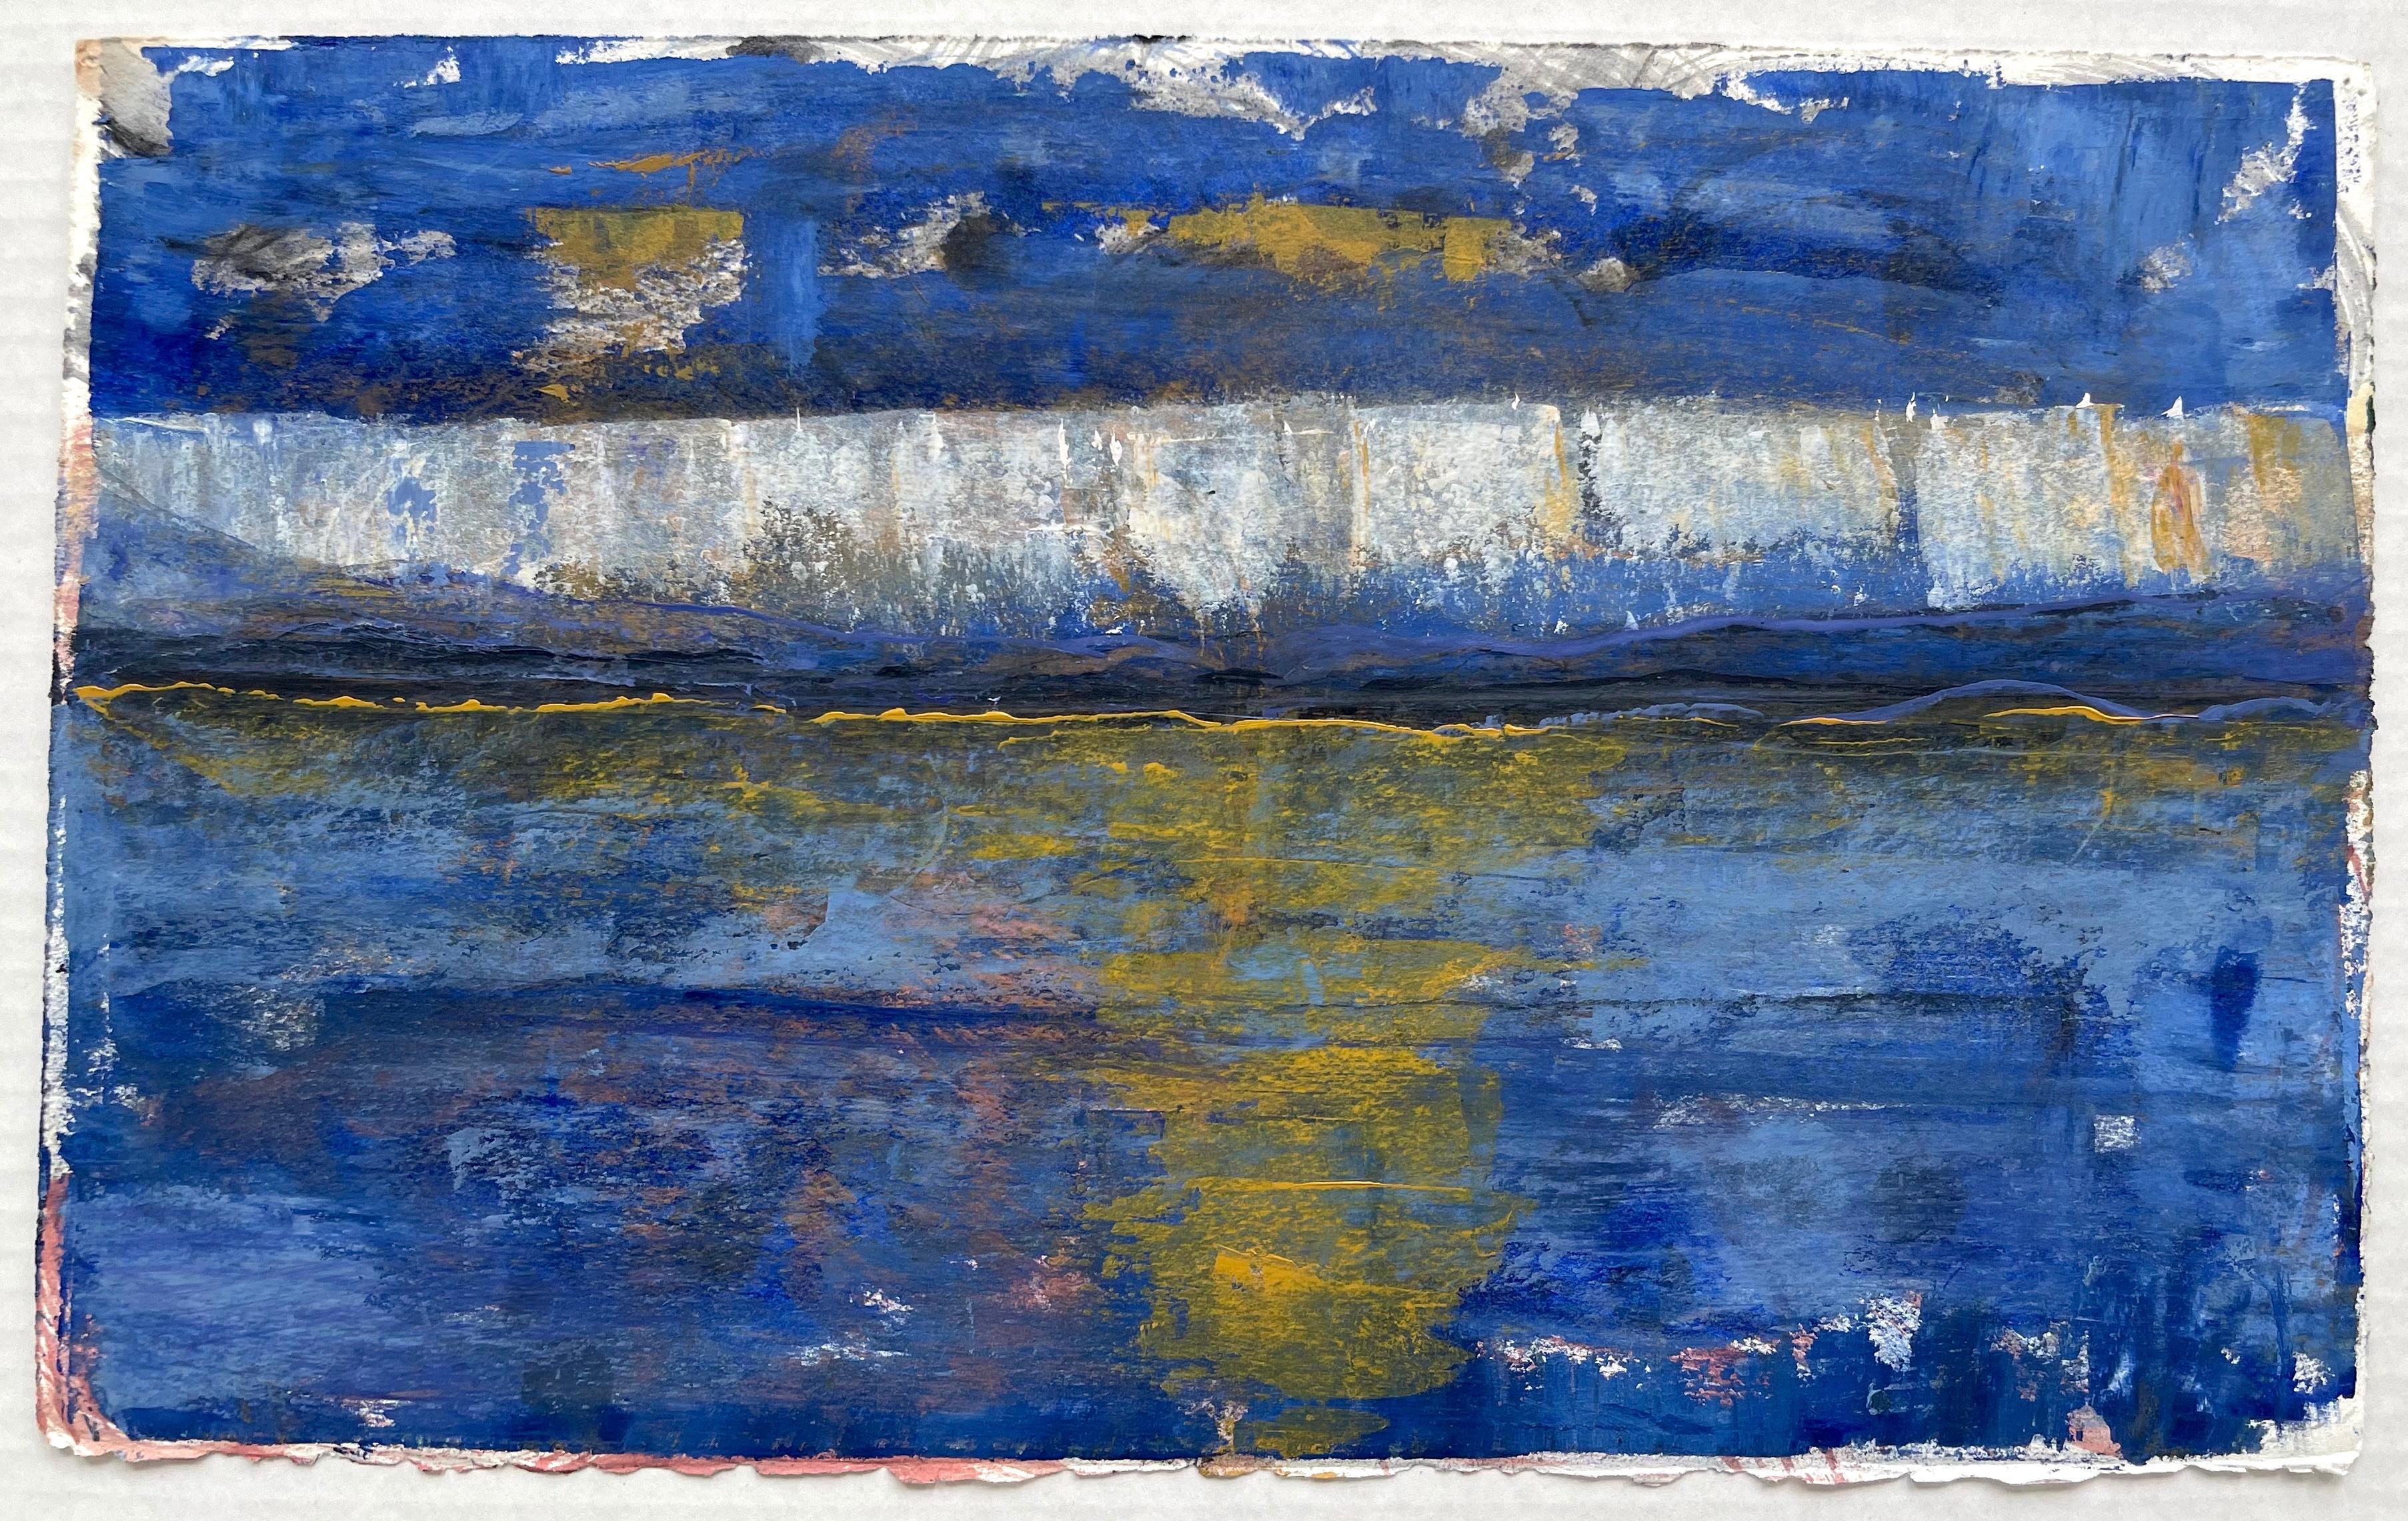 Deborah Freedman Abstract Painting - The End of Snow 18, oil painting on paper, blue and yellow, abstracted landscape